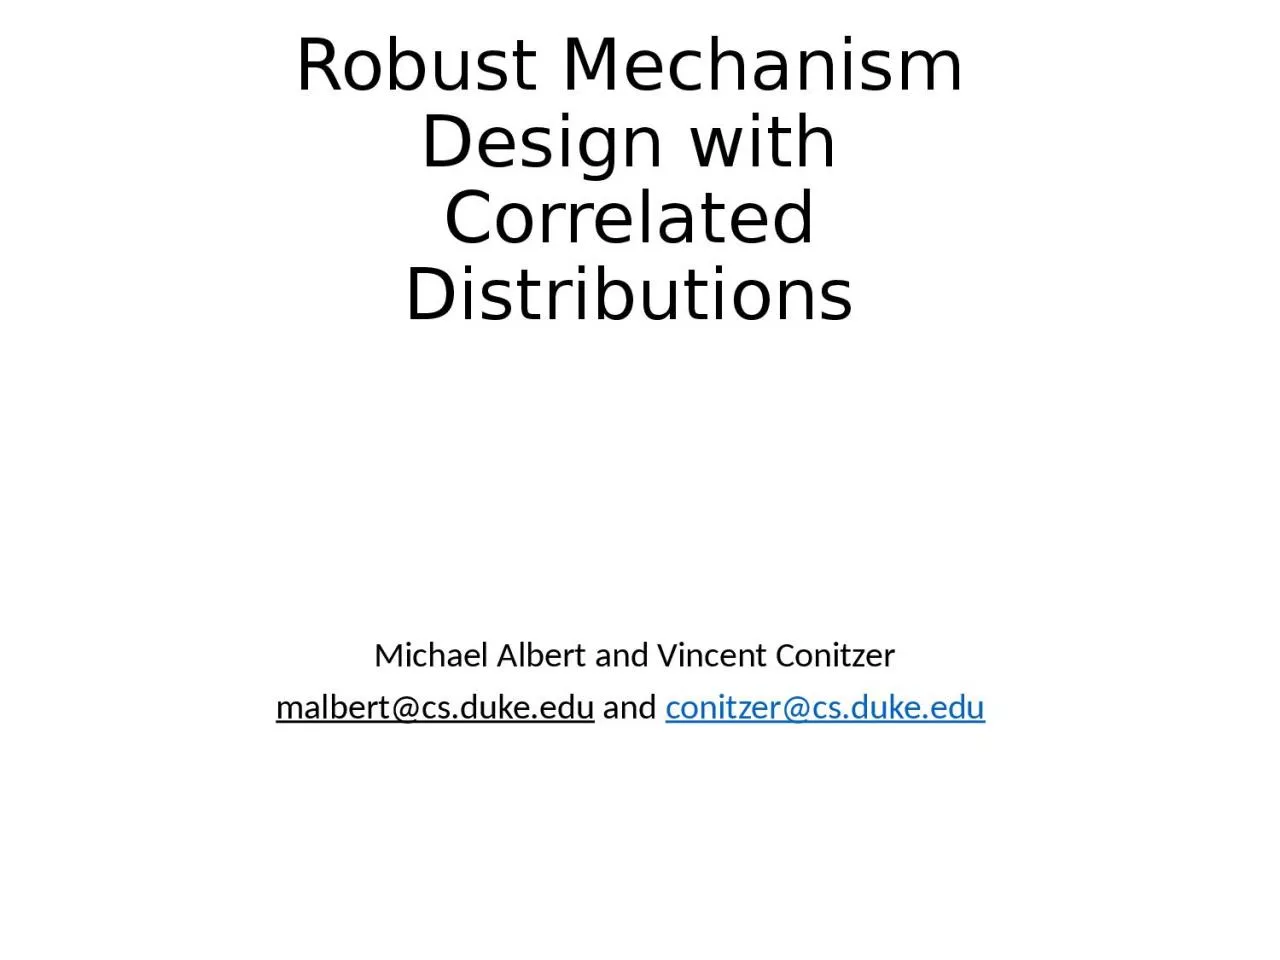 Robust Mechanism Design with Correlated Distributions